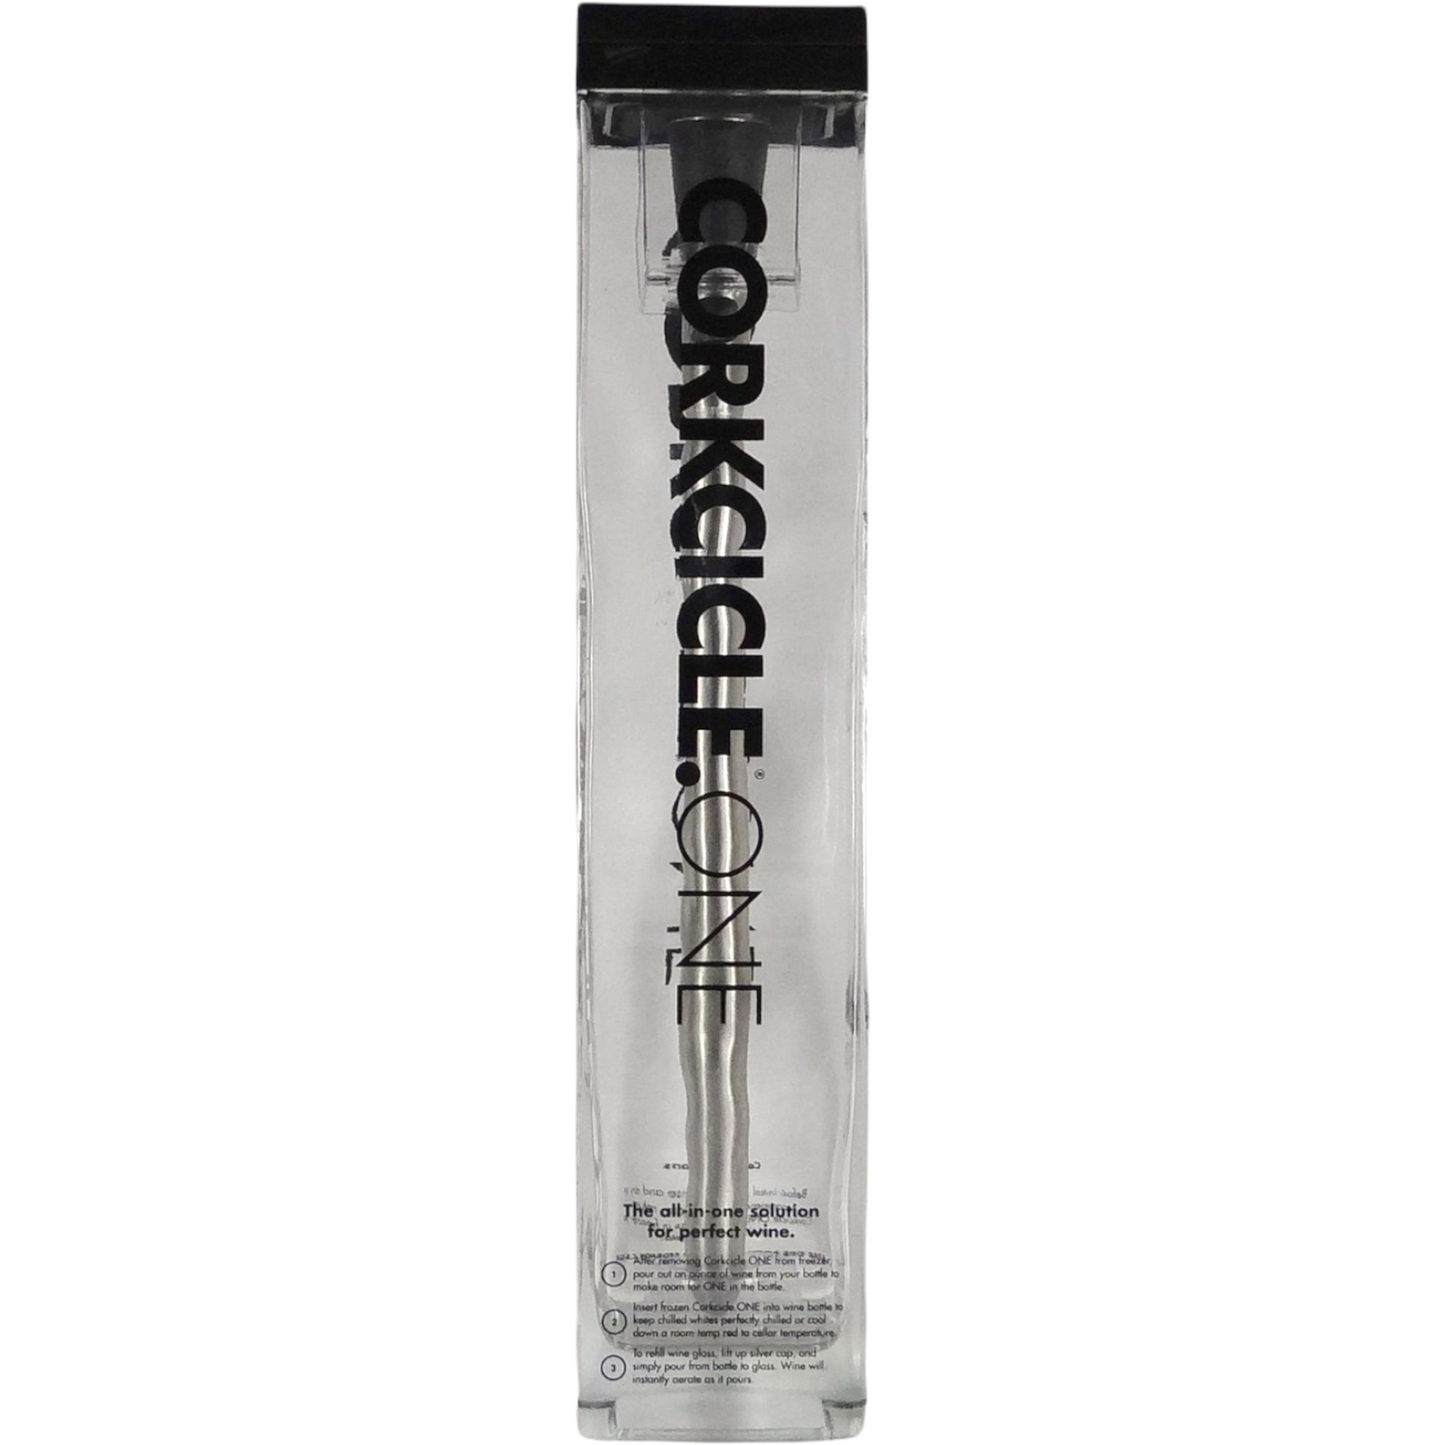 Corkcicle One 4 In 1 Wine Chiller, Aerator, Pour And Stopper Brand